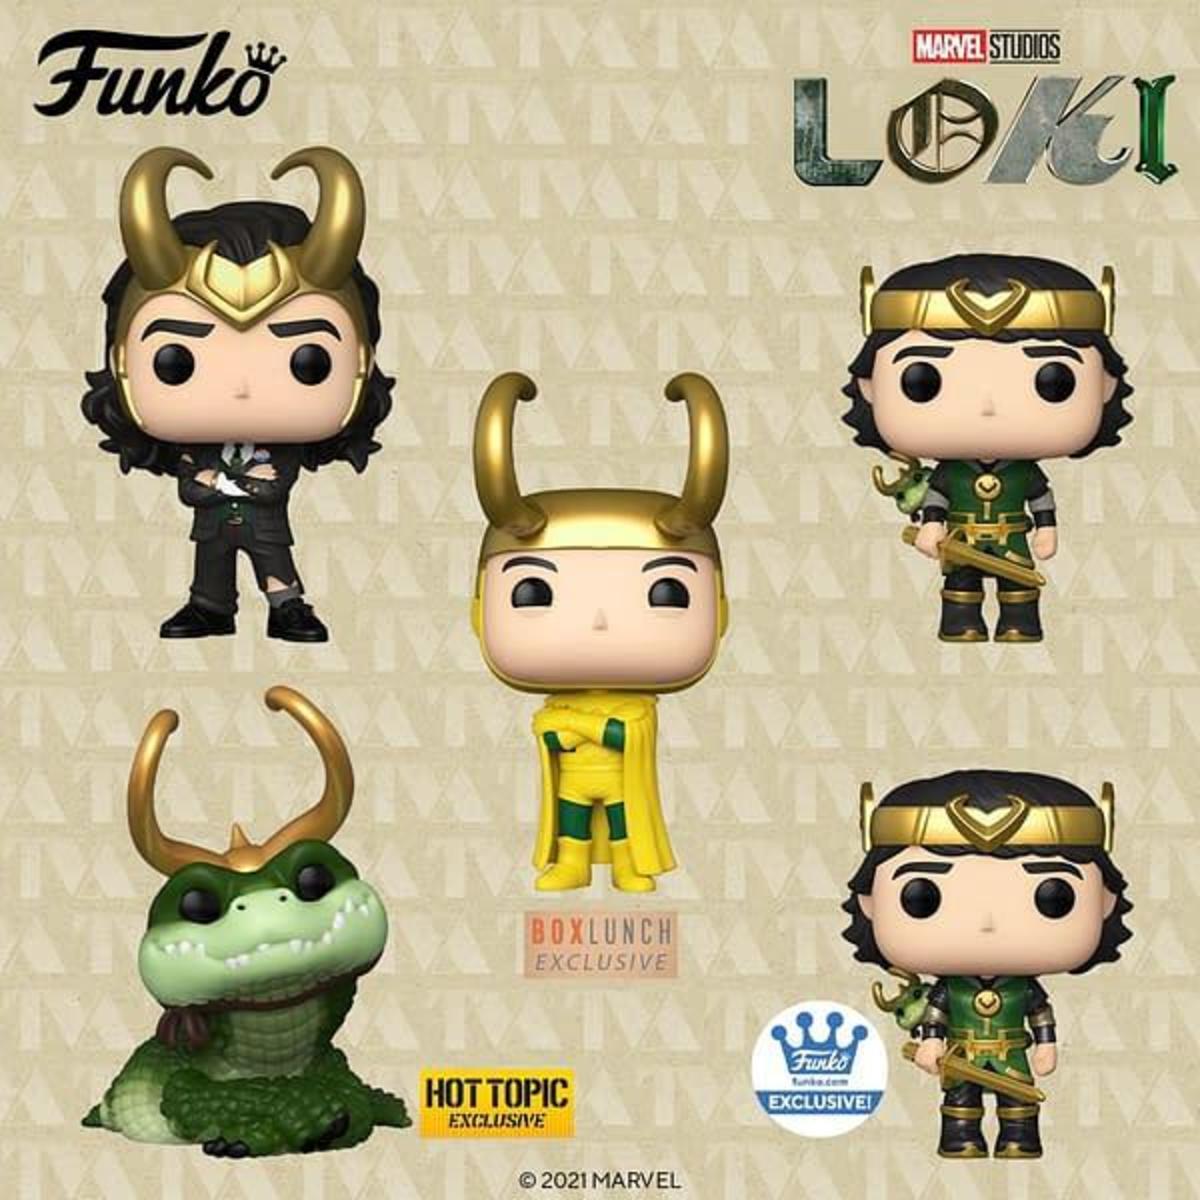 Funko Pop Game Covers Checklist, Gallery, Exclusives, Variants